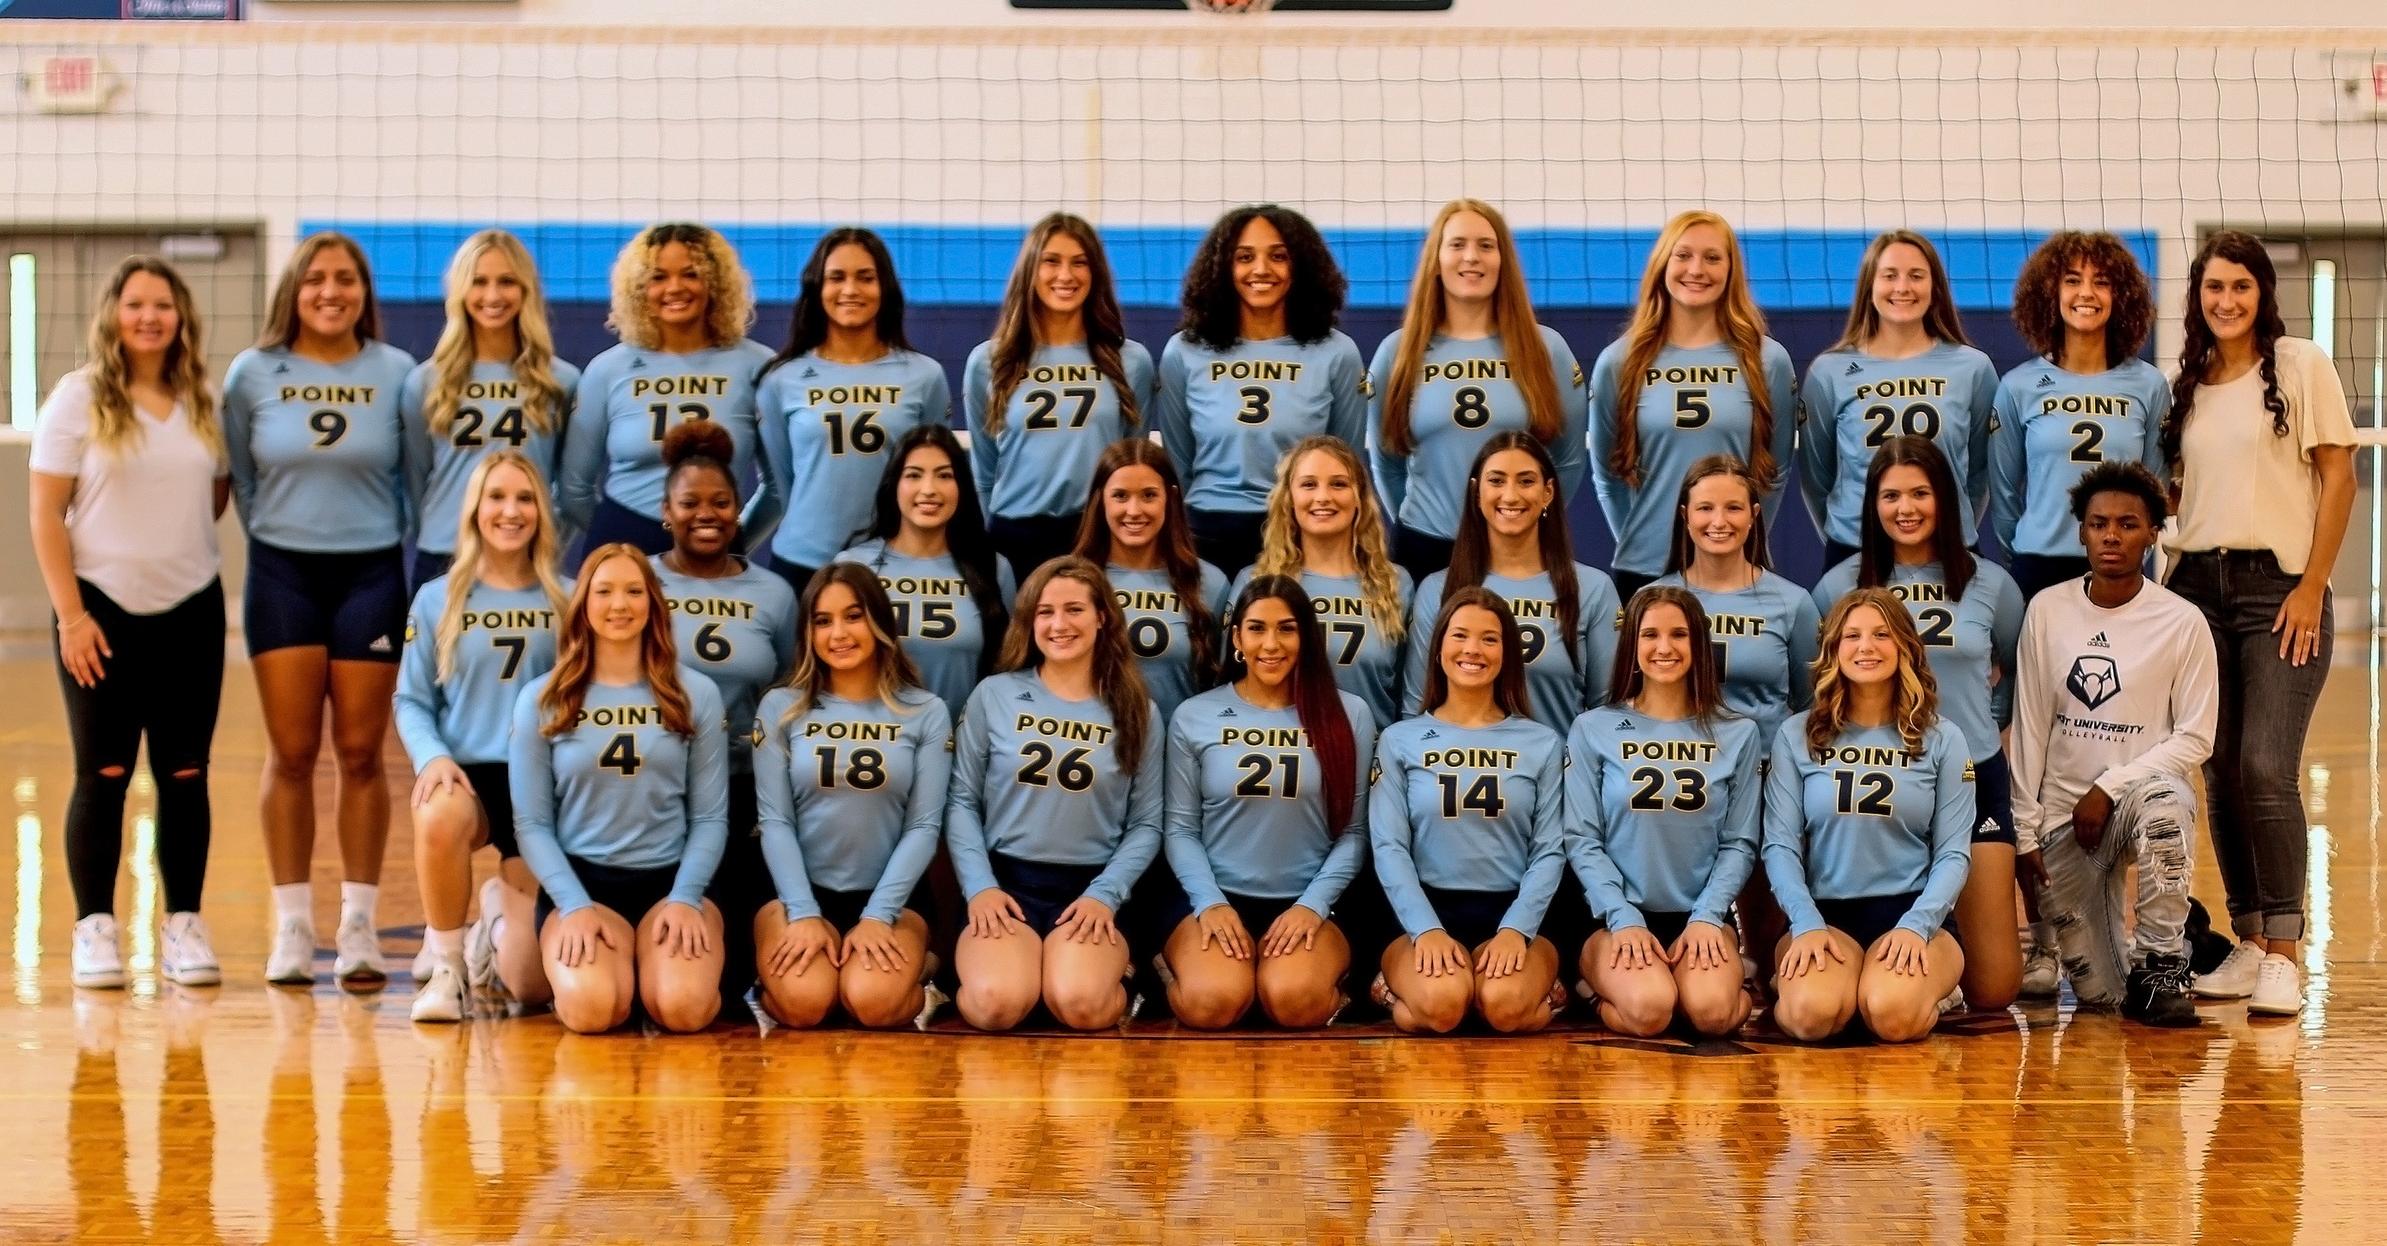 2022 Point volleyball season preview